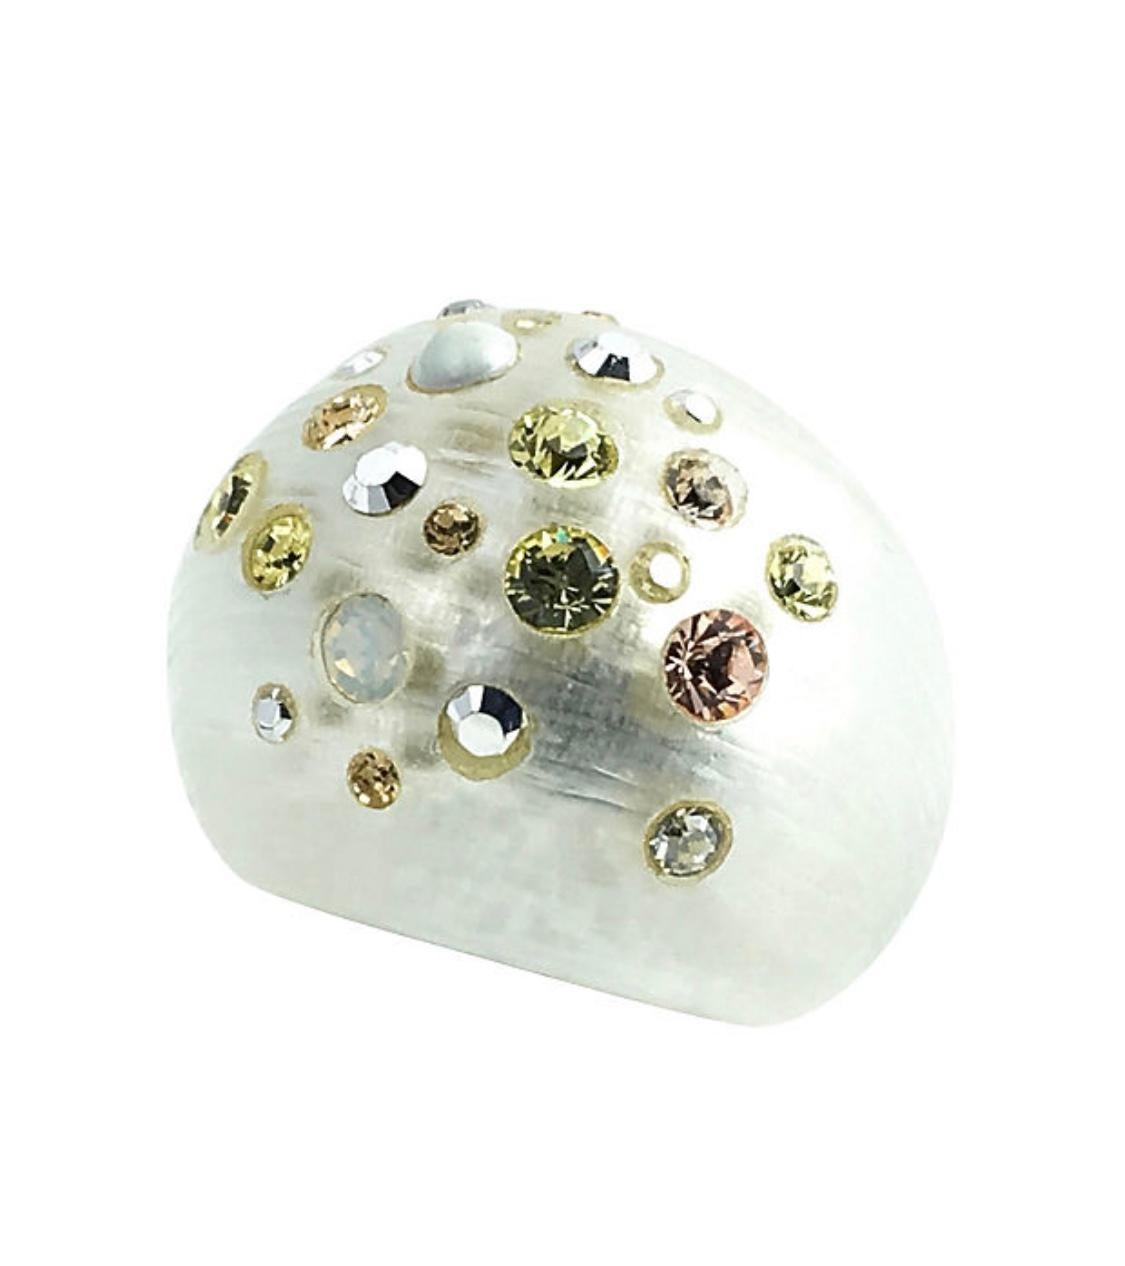 Alexis Bittar pearl-hued hand-caved Lucite bangle, clip-back earrings, and ring dusted with assorted Swarovski crystal embellishments. The bracelet has a black resin interior, hinged magnetic closure, and fits a wrist size of 7